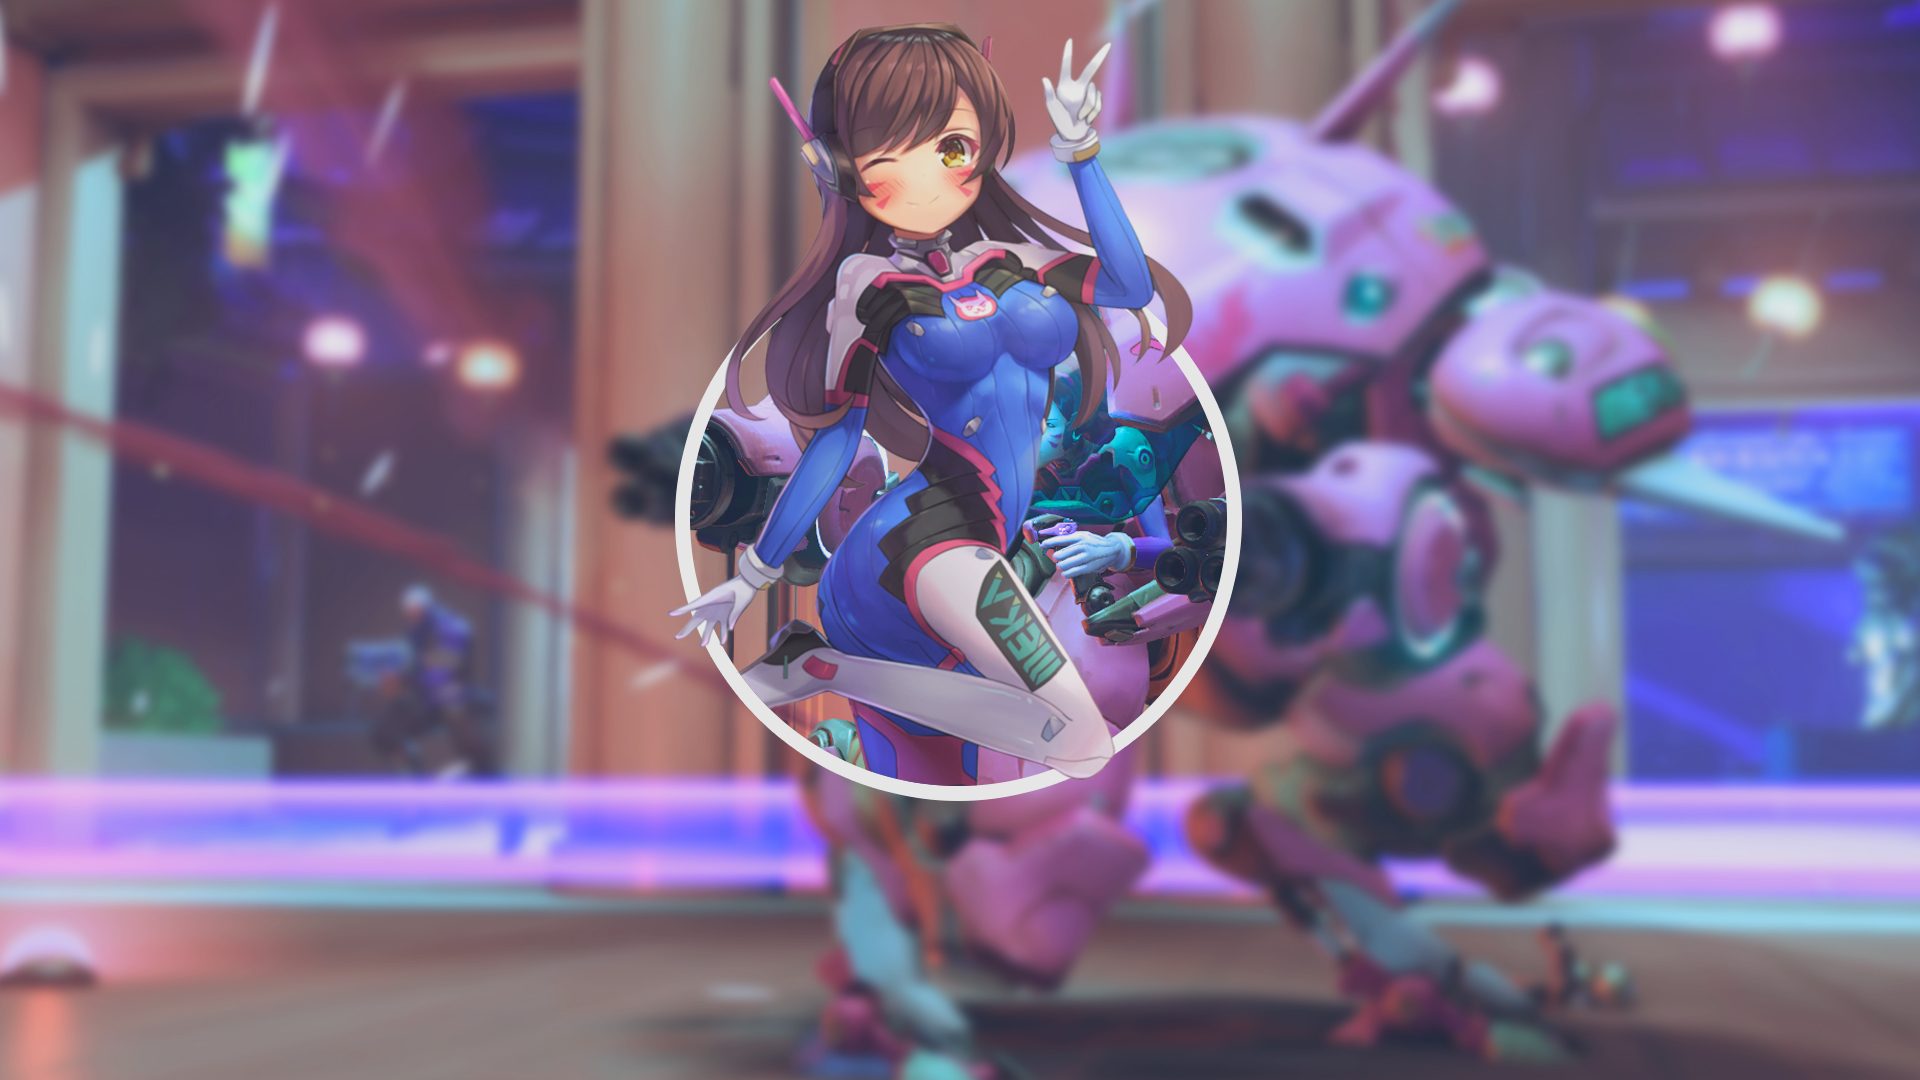 Anime 1920x1080 Overwatch anime anime girls D.Va (Overwatch) picture-in-picture